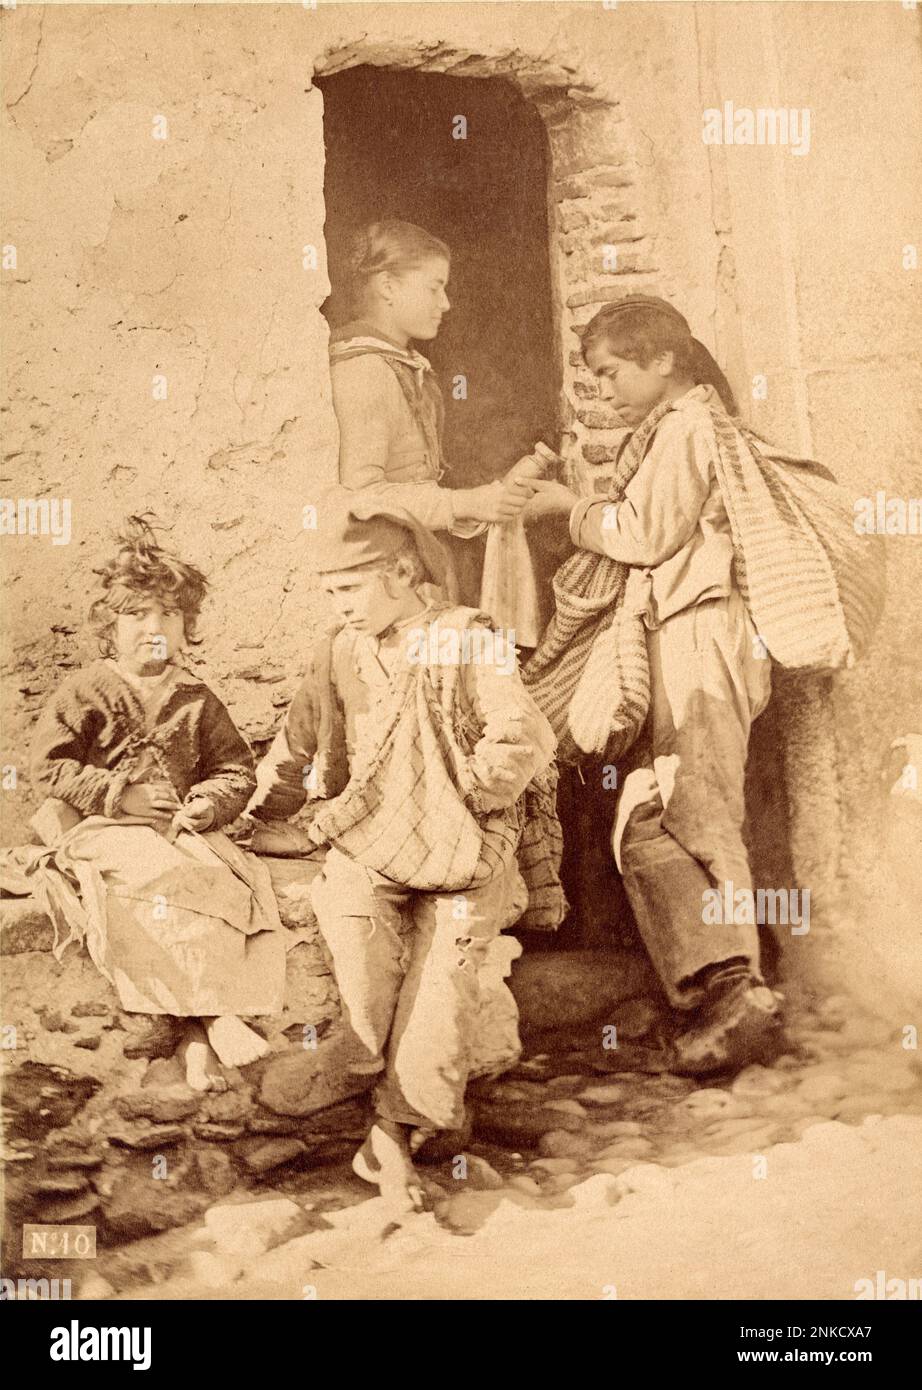 1890 ca., Taormina , Sicily , ITALY : A folkloristic Sicilian studio by photographer GIUSEPPE BRUNO ( 1836 - 1904 ) with little sSicily boys and girl . Bruno was the teacher of celebrated german  photographer Baron WILHELM VON GLOEDEN ( 1856 - 1931 ). The two photographer used not only the same locations but also , like models , the same young boys and girls of Taormina . Usually more of Bruno photos was confused for mistake with some shots by Von Gloeden .  - FOTOGRAFO - FOTOGRAFIA - FOTOGRAPHY  - SICILIA - SICILY - ITALIA - BAMBINO - BAMBINI - BAMBINA - BAMBINE - SCENA DI COSTUME FOLKLORISTI Stock Photo